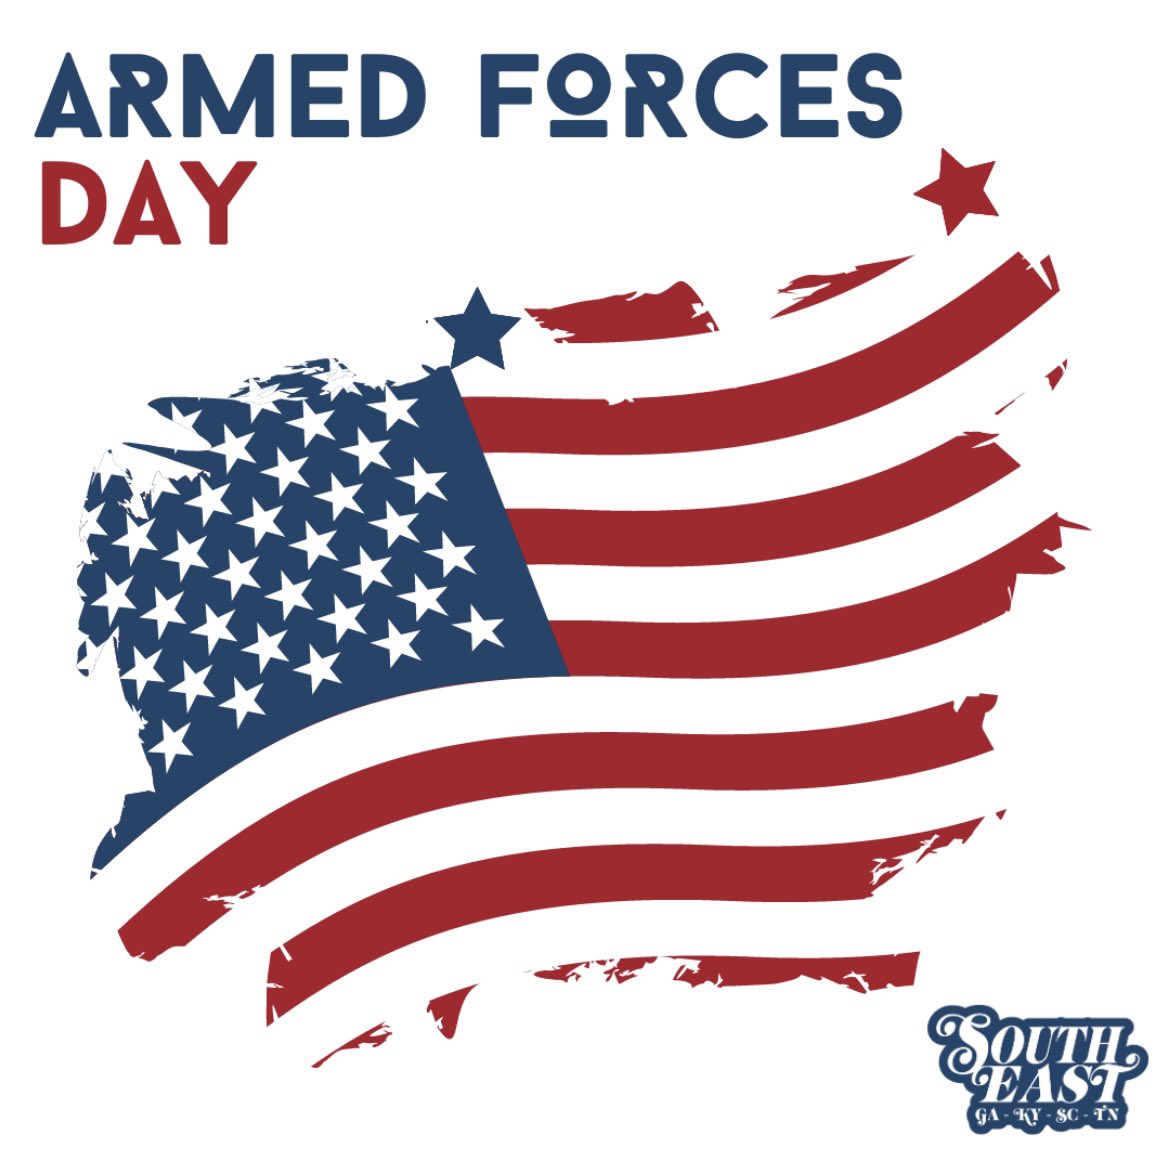 Salute to our armed forces! 🎖️💪 THANK YOU to all the brave men and women who serve our country with courage and dedication. We're forever grateful for your commitment to protecting our freedom. Keep being awesome! 🇺🇸❤️ #ArmedForcesDay #Heroes #GratefulNation